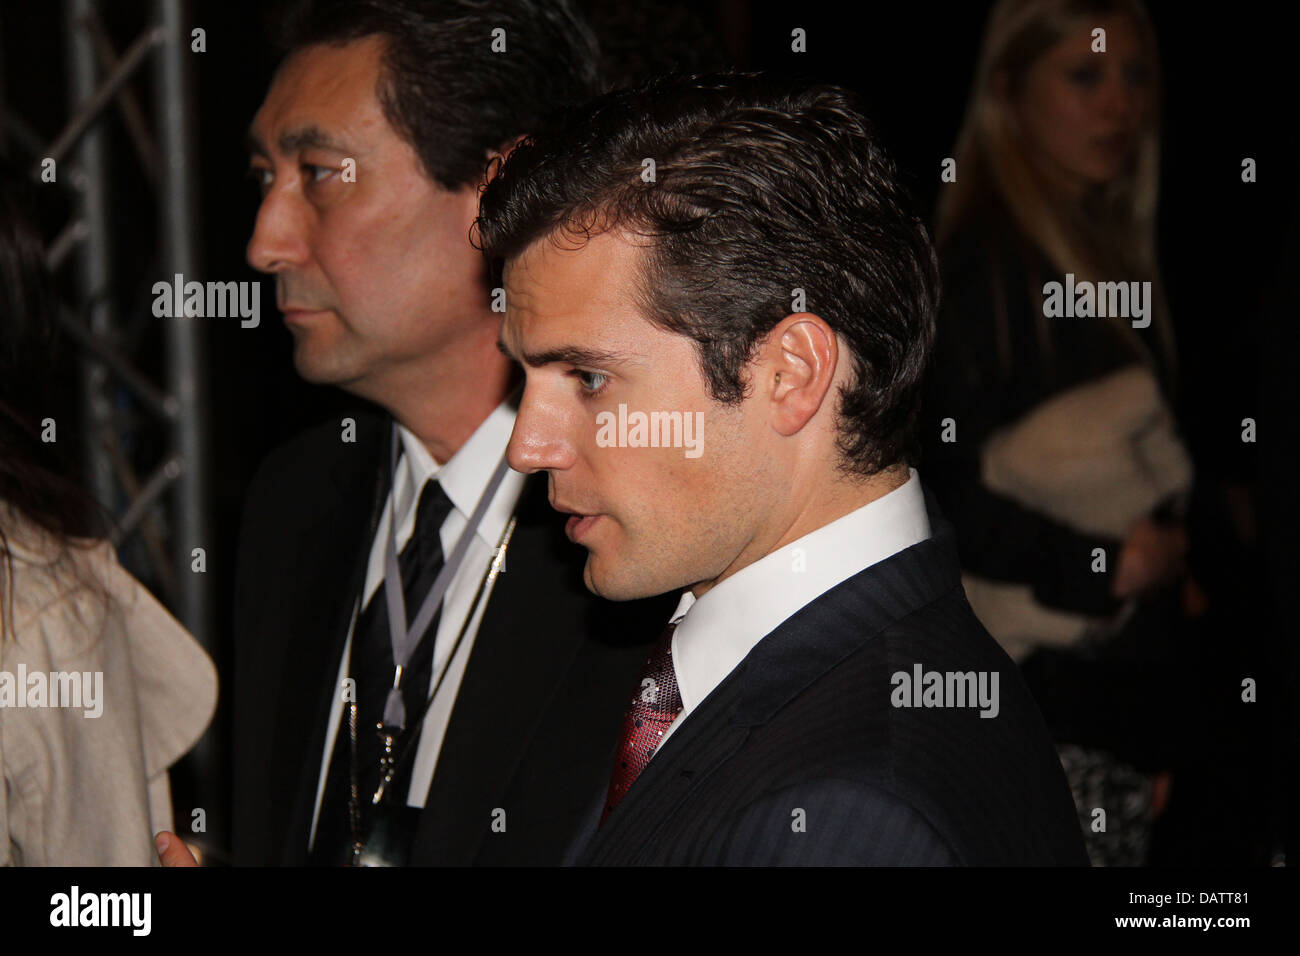 Pictured is Henry Cavill, who plays Superman/Clark Kent arriving for the Australian Premiere of Man of Steel. Stock Photo